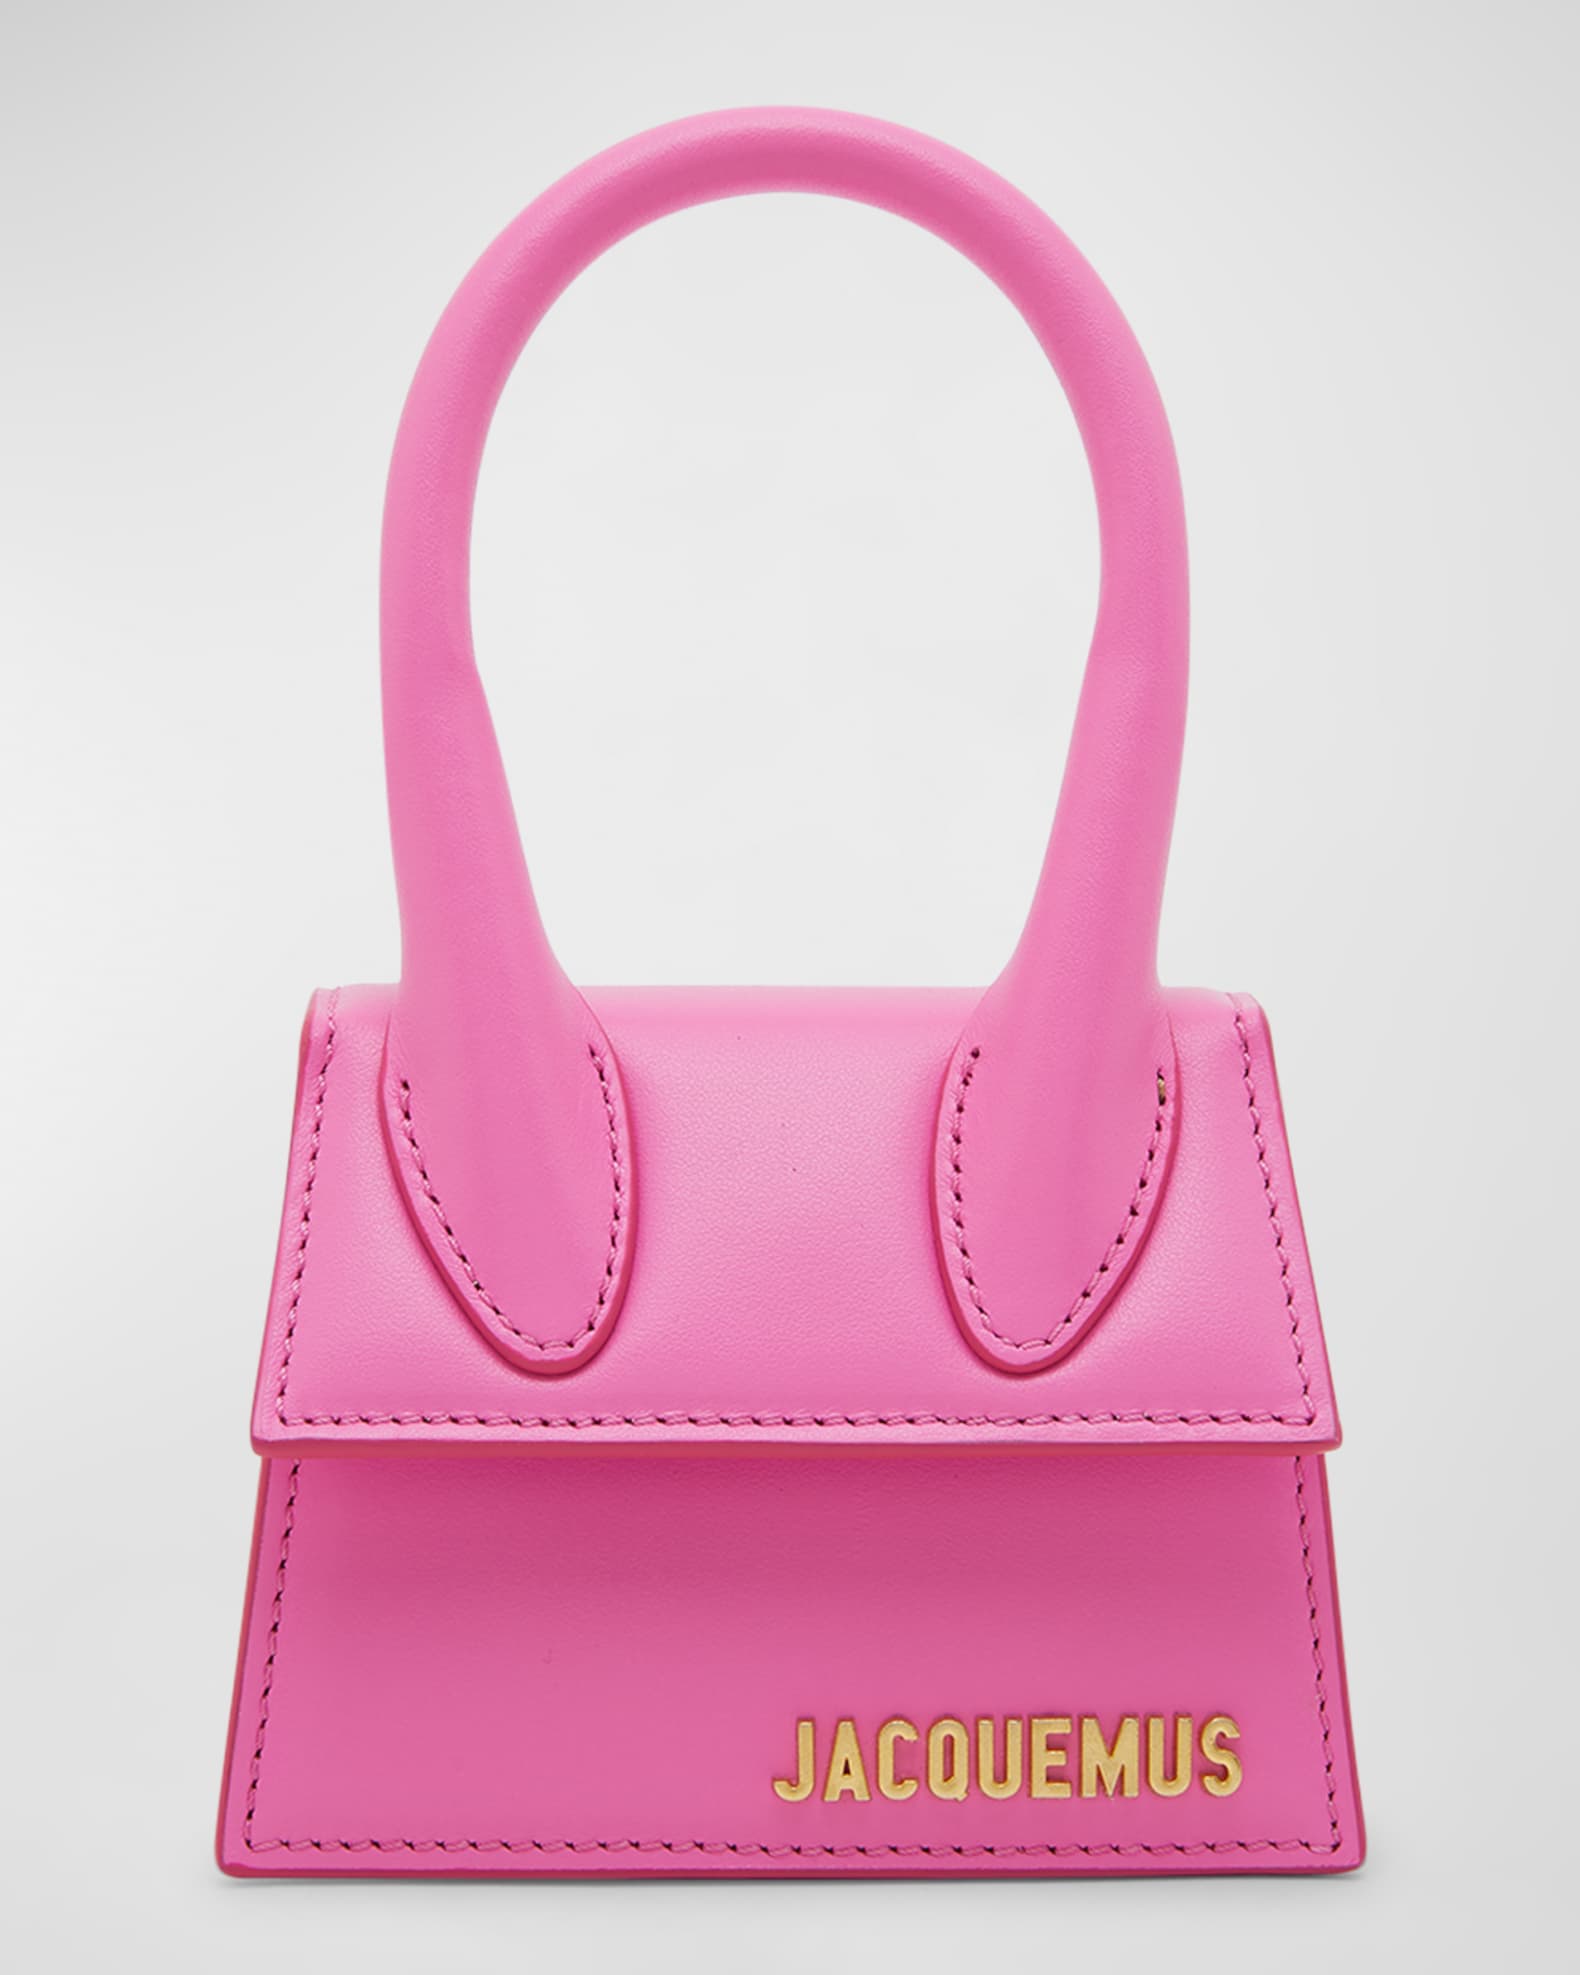 Jacquemus Le Chiquito Bag in Pink